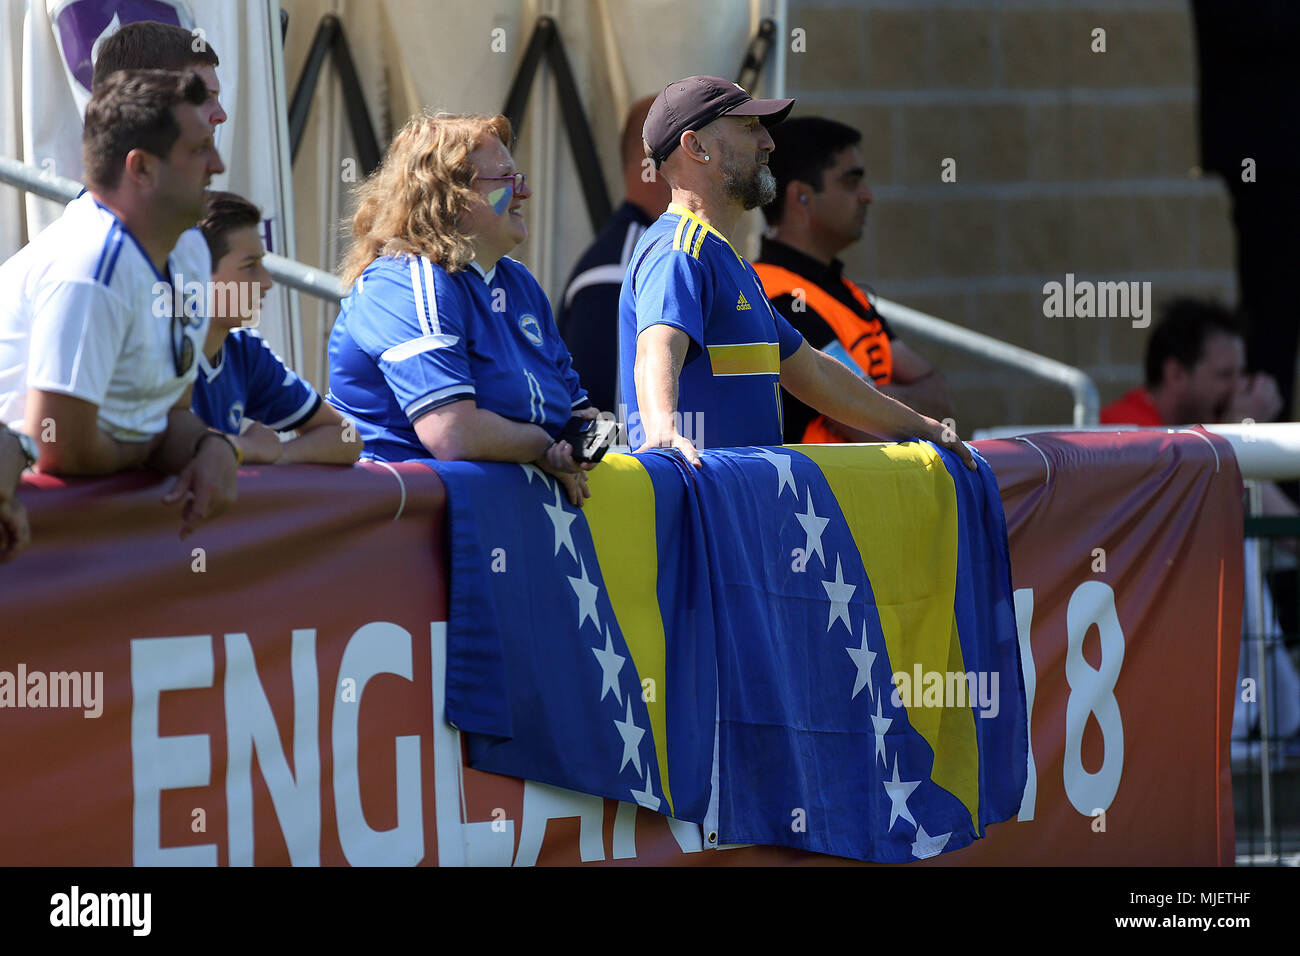 Loughborough, UK. 5th May, 2018. Bosnian fans during the 2018 UEFA European Under-17 Championship Group C match between Denmark and Bosnia and Herzegovina at Loughborough University Stadium on May 5th 2018 in Loughborough, England. (Photo by Paul Chesterton/phcimages.com) Credit: PHC Images/Alamy Live News Stock Photo